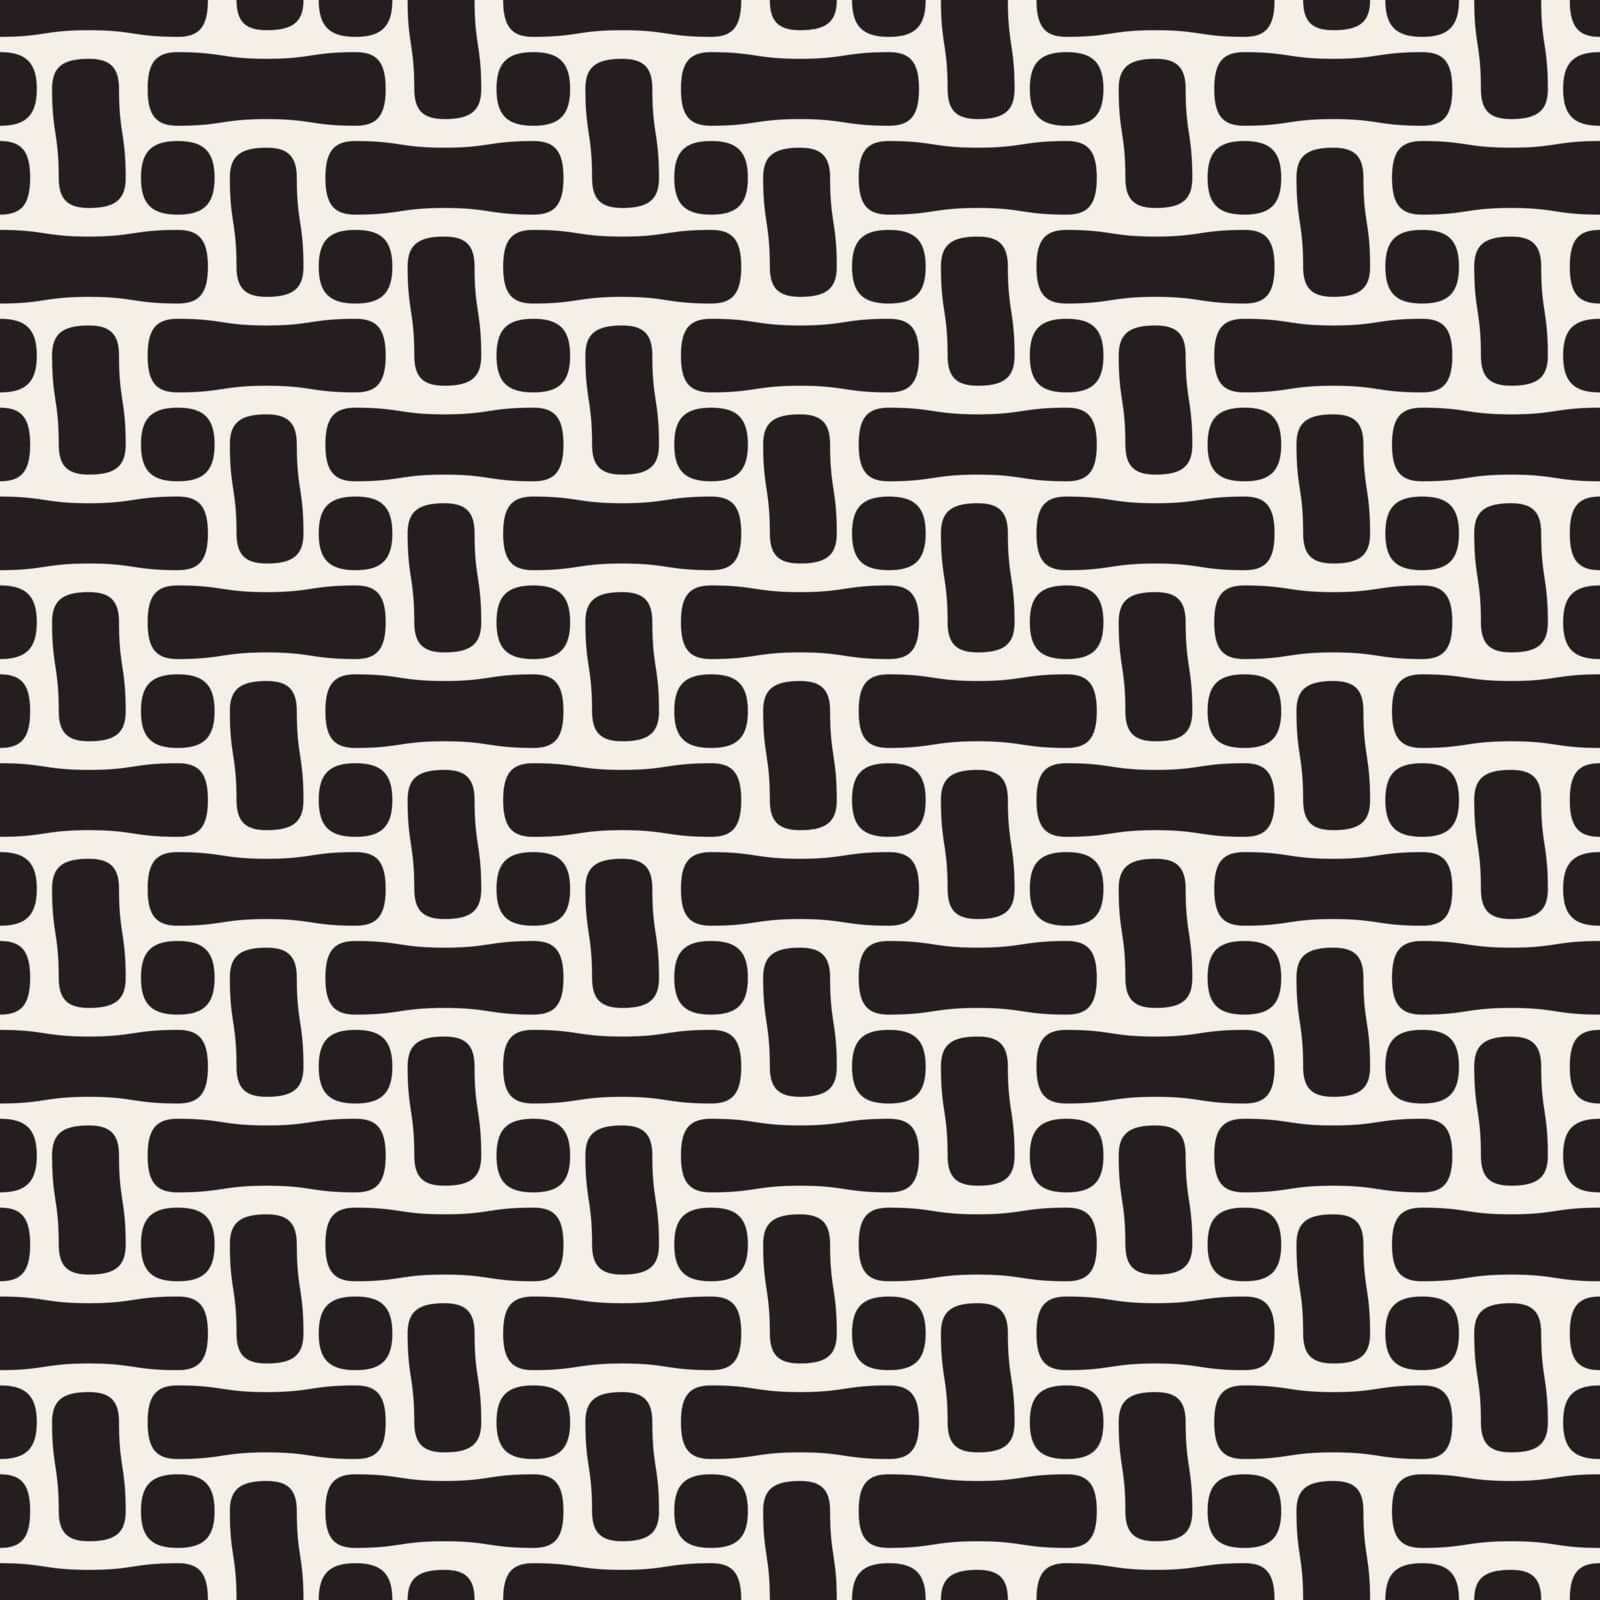 Vector Seamless Black And White Rounded Geometric Pattern by CreatorsClub